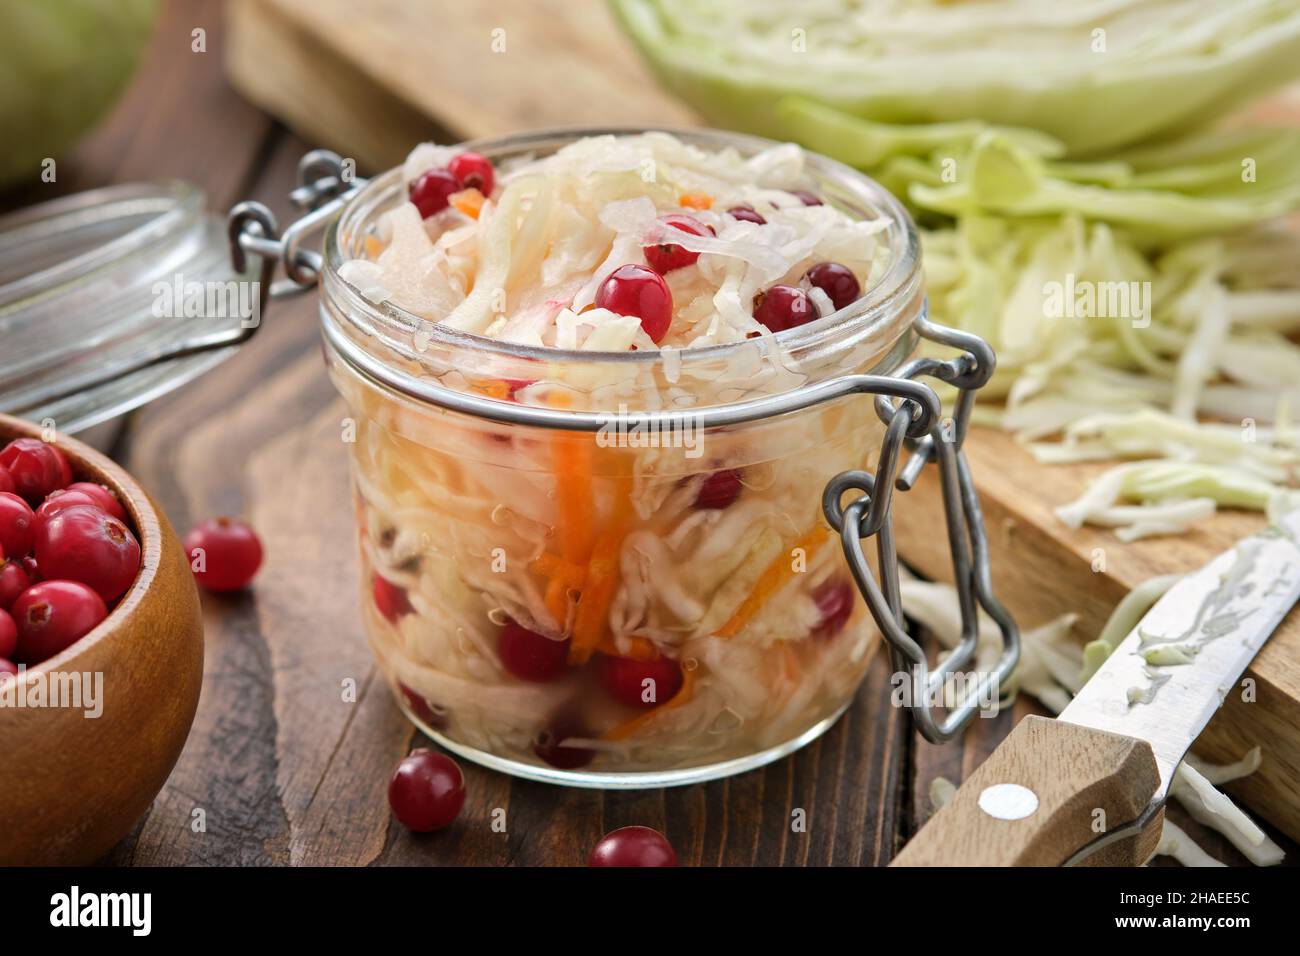 Jar of sour cabbage, pickled sauerkraut.  Fermented cabbage  with cranberries, coleslaw salad. Healthy food, diet food. Stock Photo